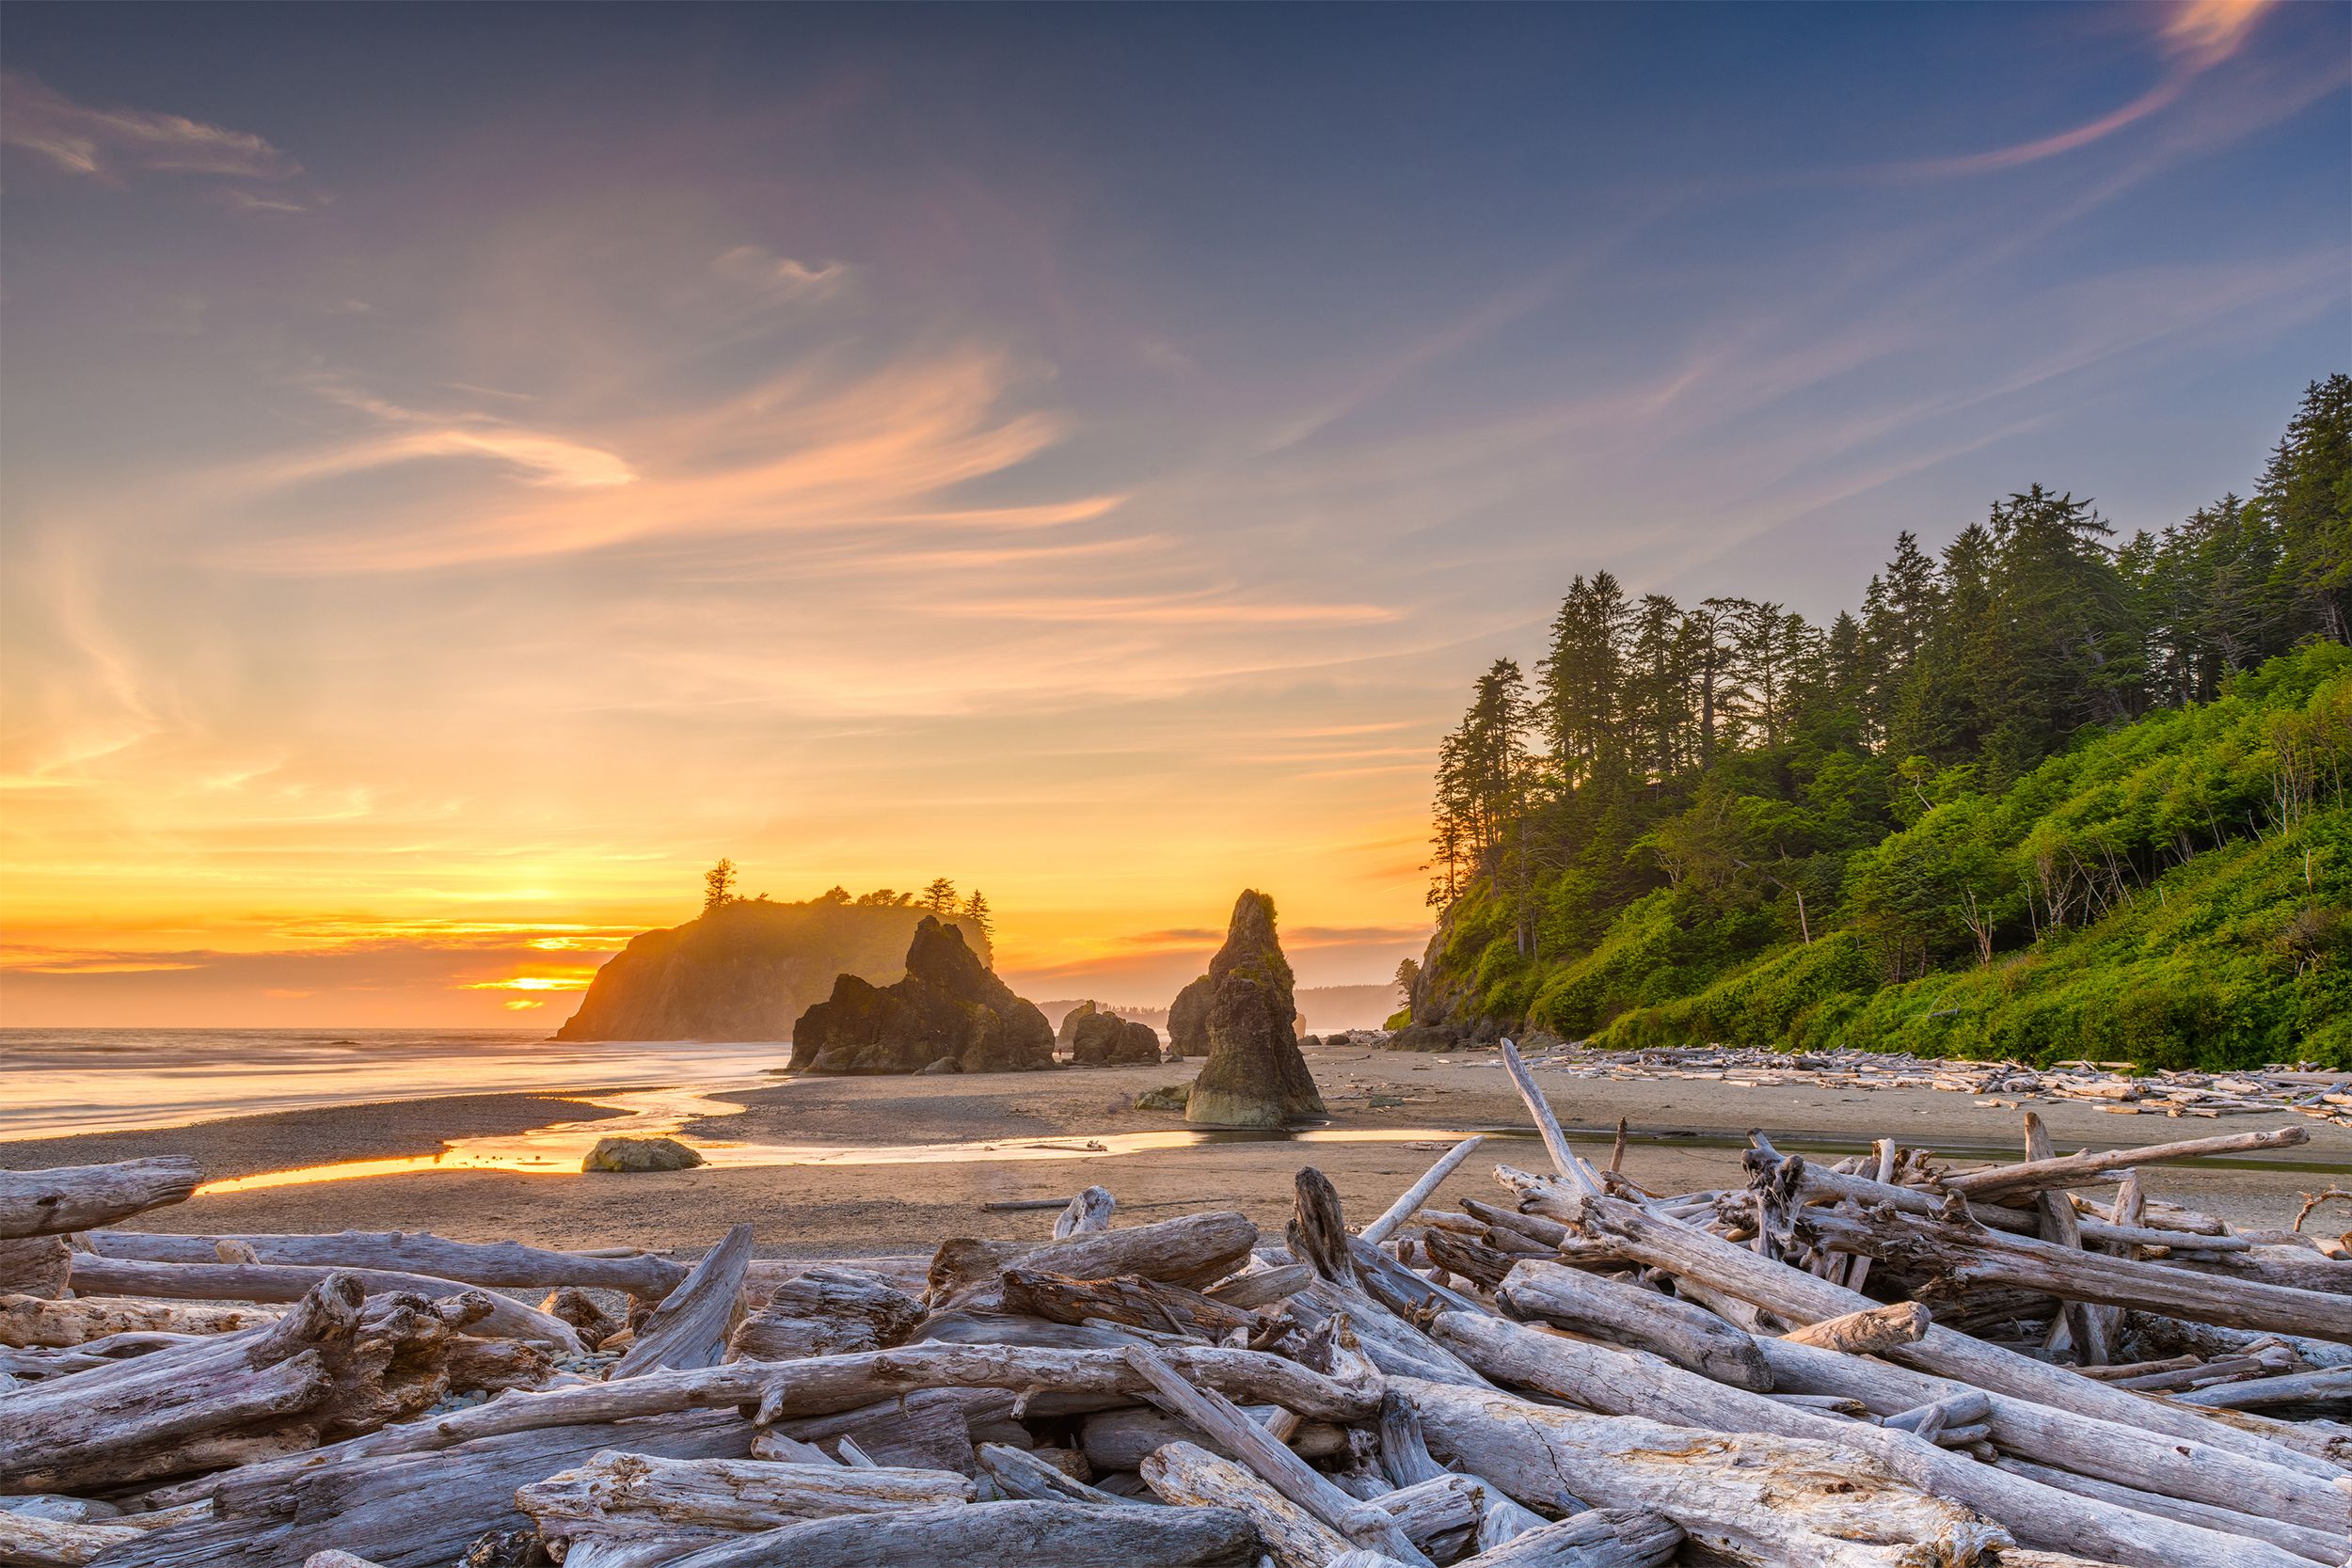 <p>Spread among its nearly 1 million acres are several distinct ecosystems to explore at <a href="https://www.nps.gov/olym/index.htm">Olympic National Park</a>. The stunning variety includes glacier-capped mountains, old-growth rainforest, and in excess of 70 miles of coast. </p>